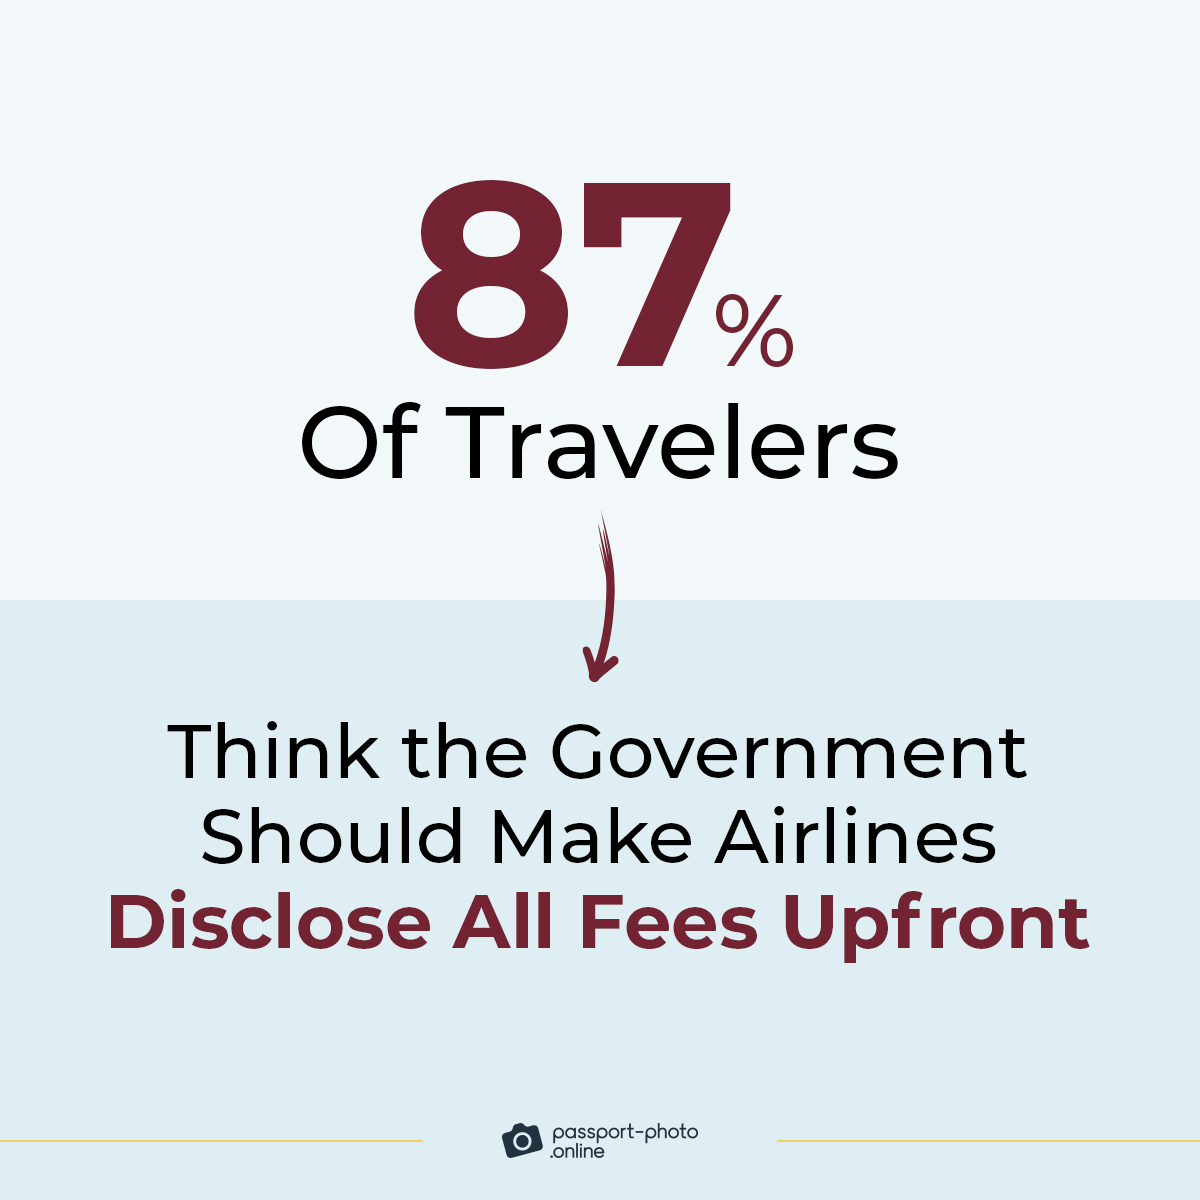 87% of people agree or strongly agree that the US Department of State should make airlines disclose all fees upfront.